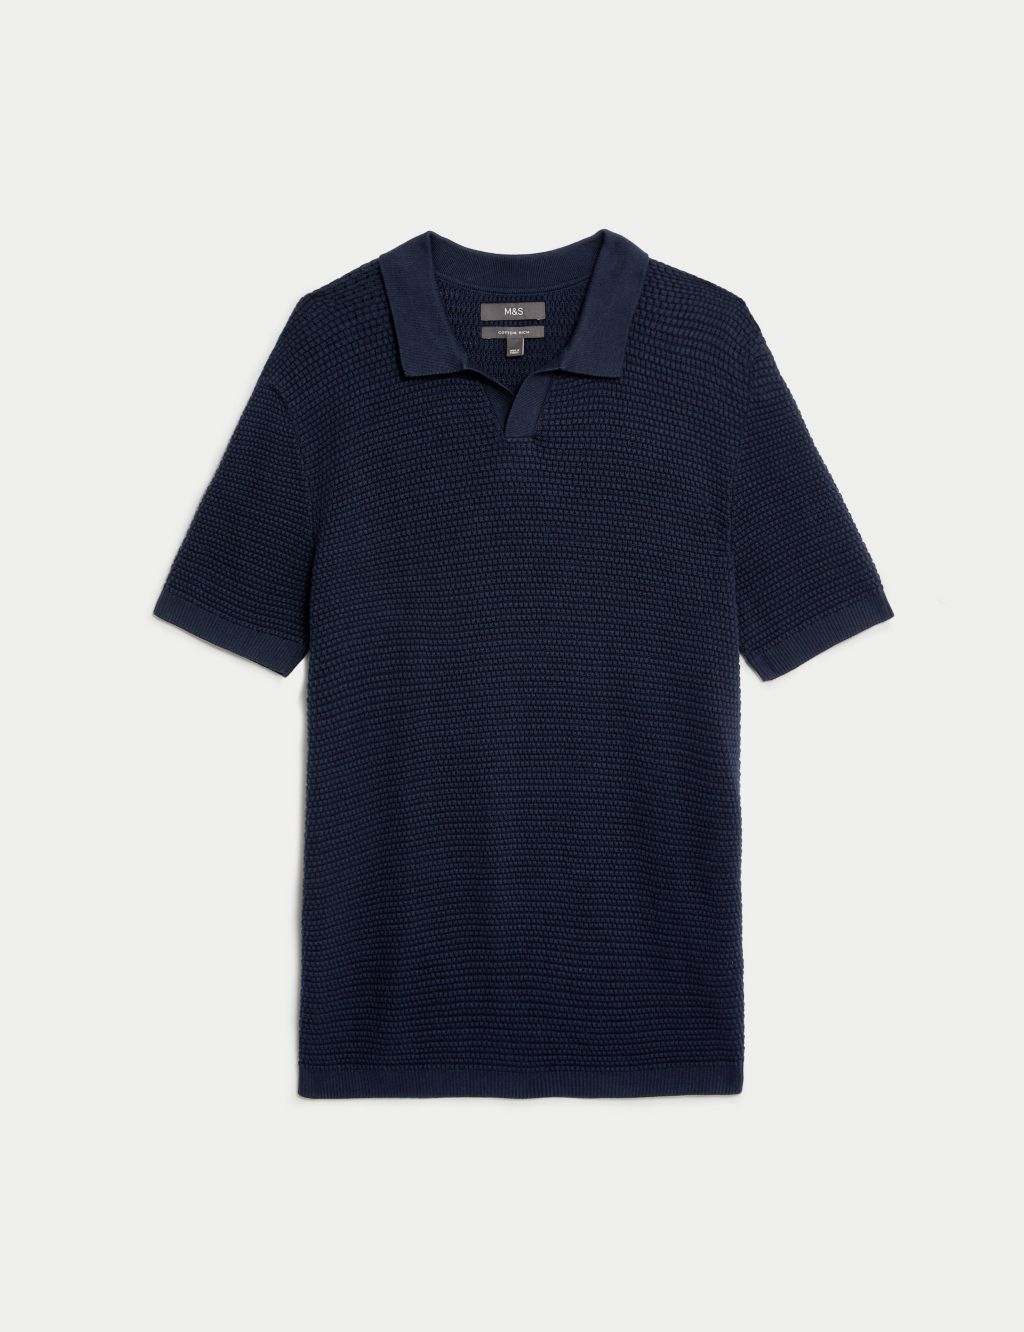 Cotton Rich Knitted Polo Shirt image 2